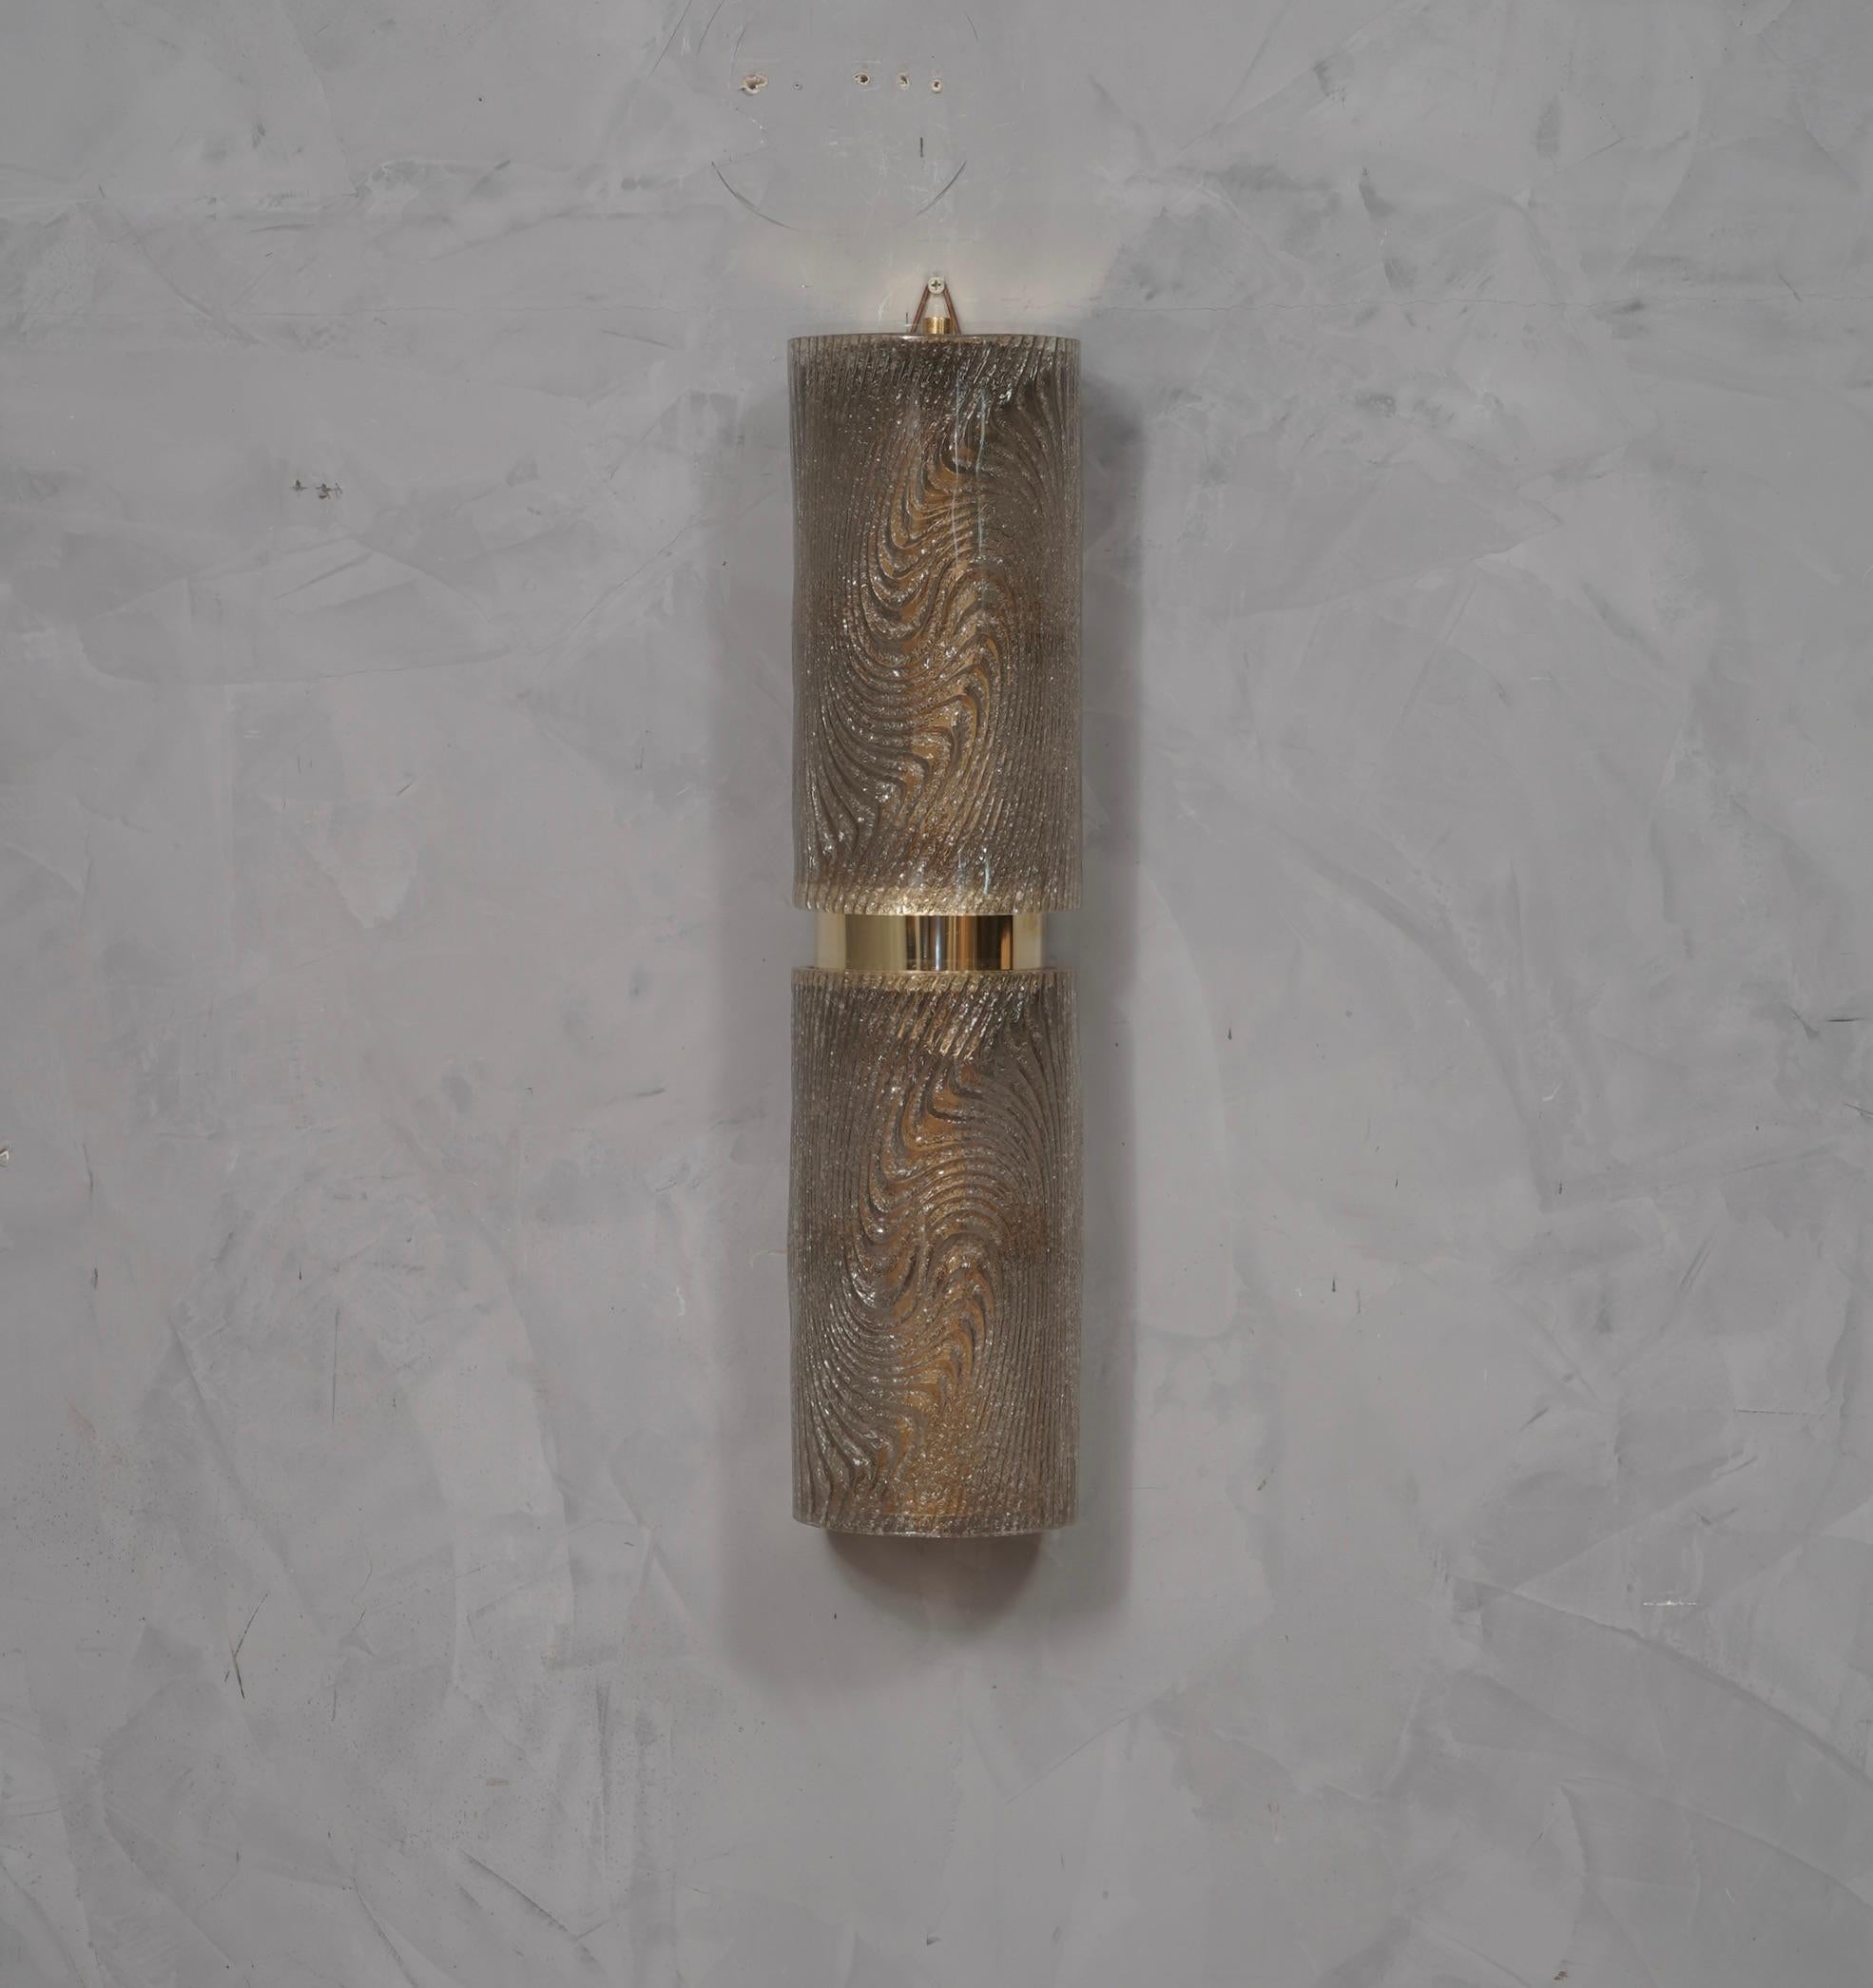 Refined and delicate design for this wall light with dove-gray color Murano glass.

The applique is formed by a metal structure gold colored that allows the superimposed housing of two beautiful dove gray Murano glass tiles. The design is very clean